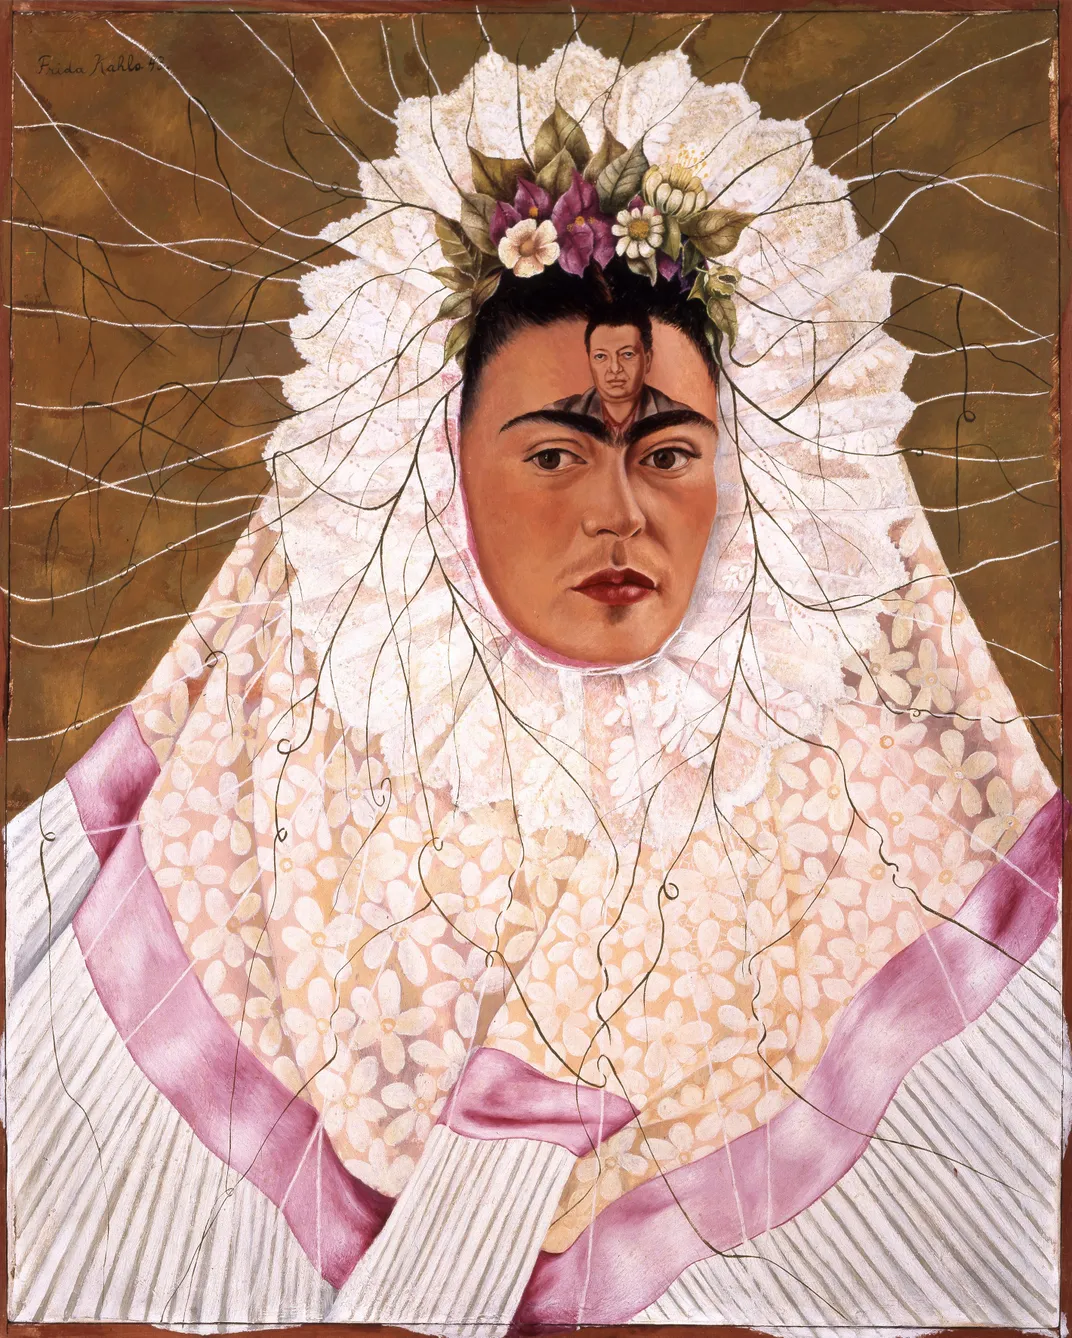 A painting of frida kahlo with flowers on her head - Frida Kahlo